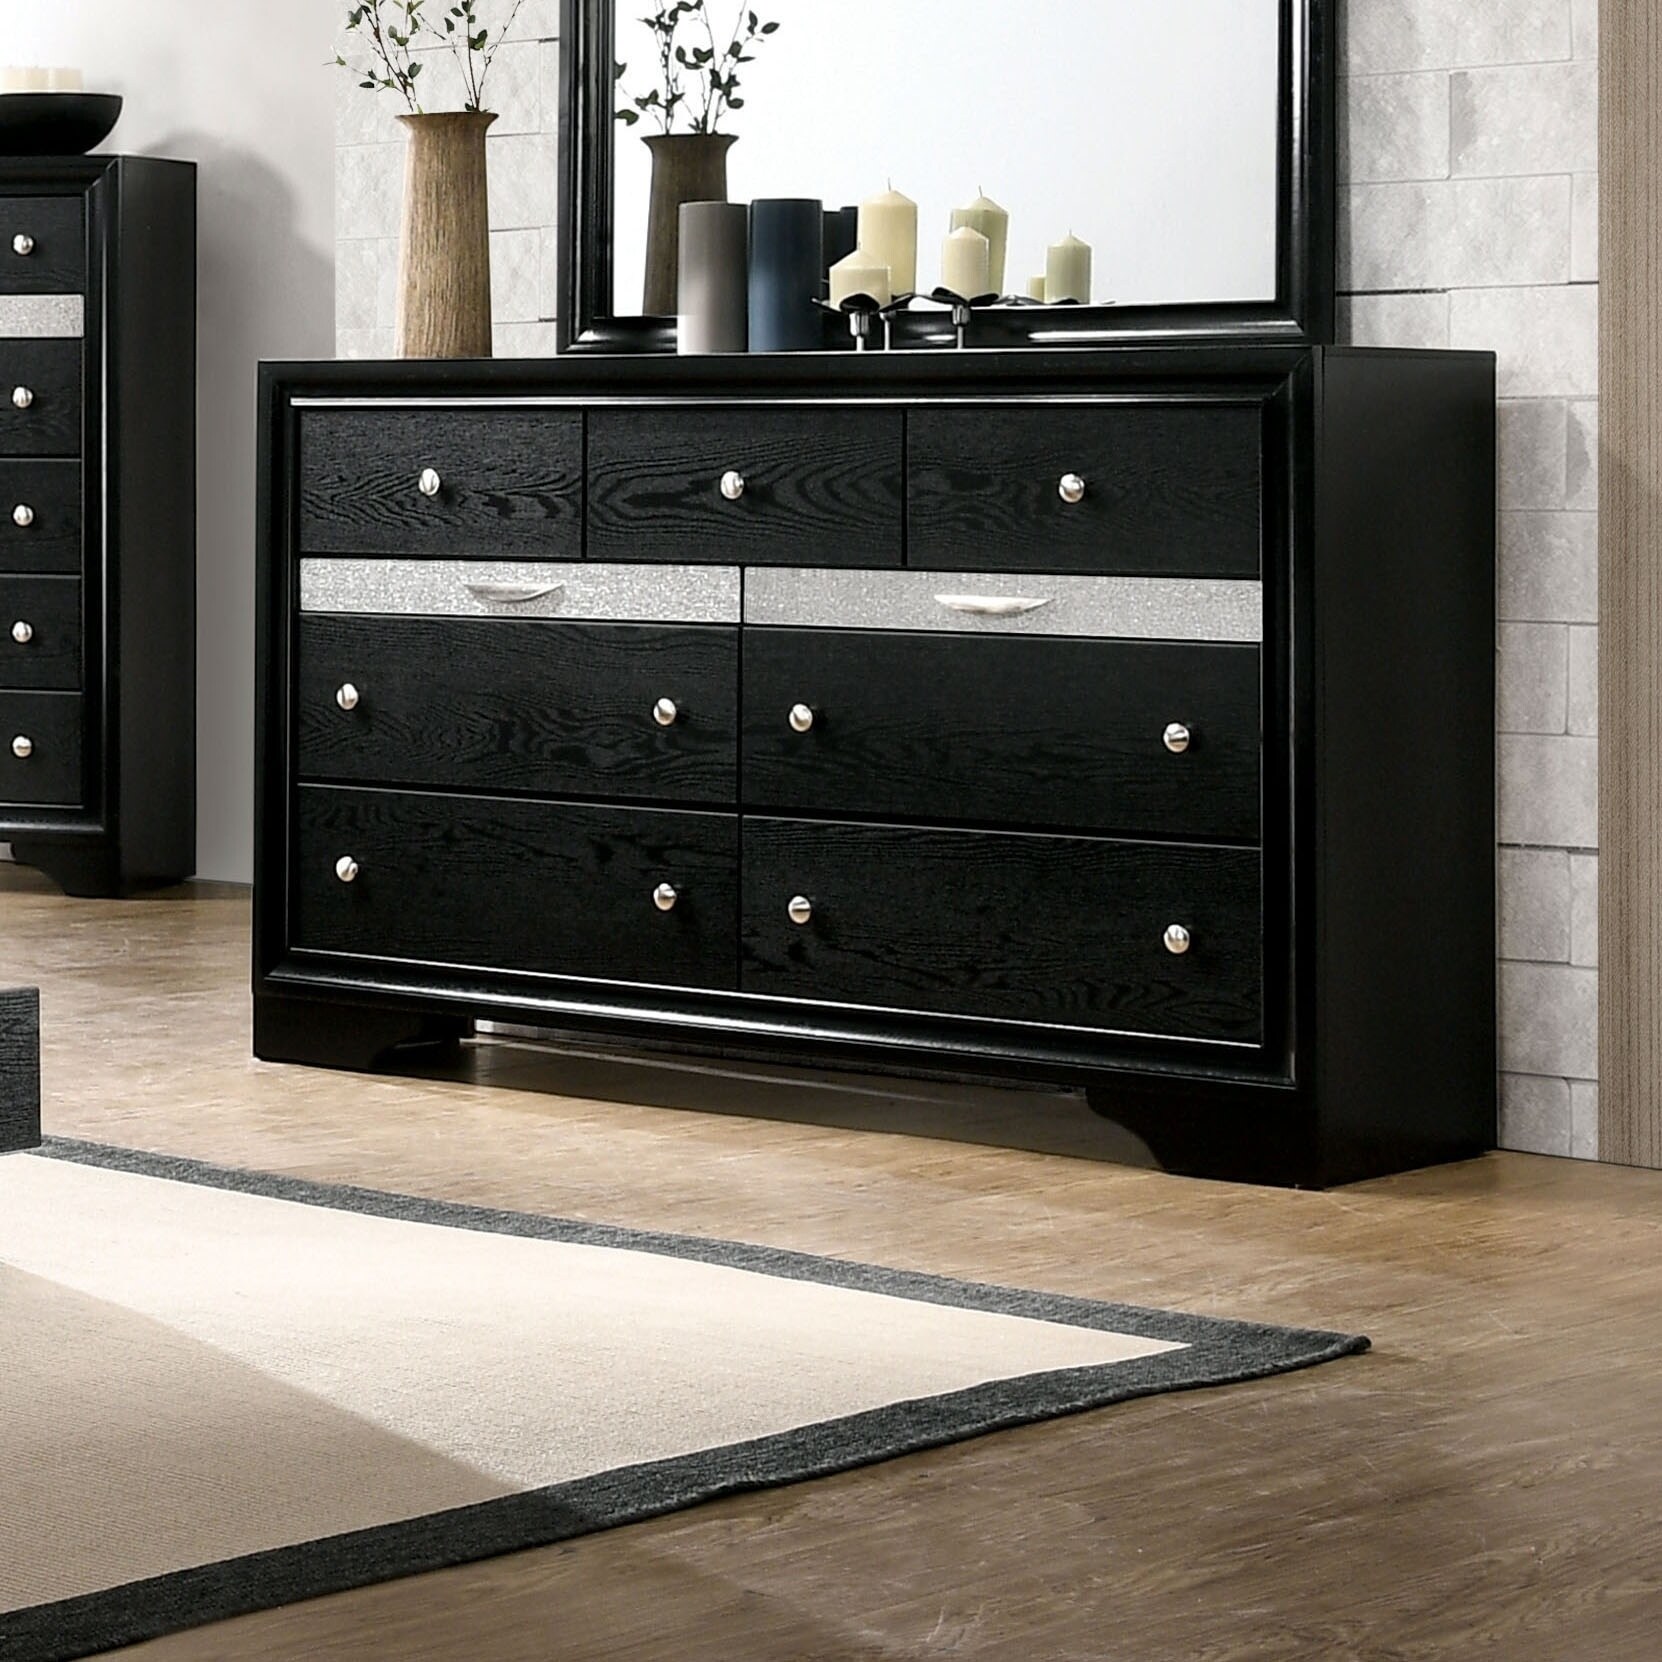 Shop Silver Orchid Aoki Contemporary Black 9 Drawer Dresser